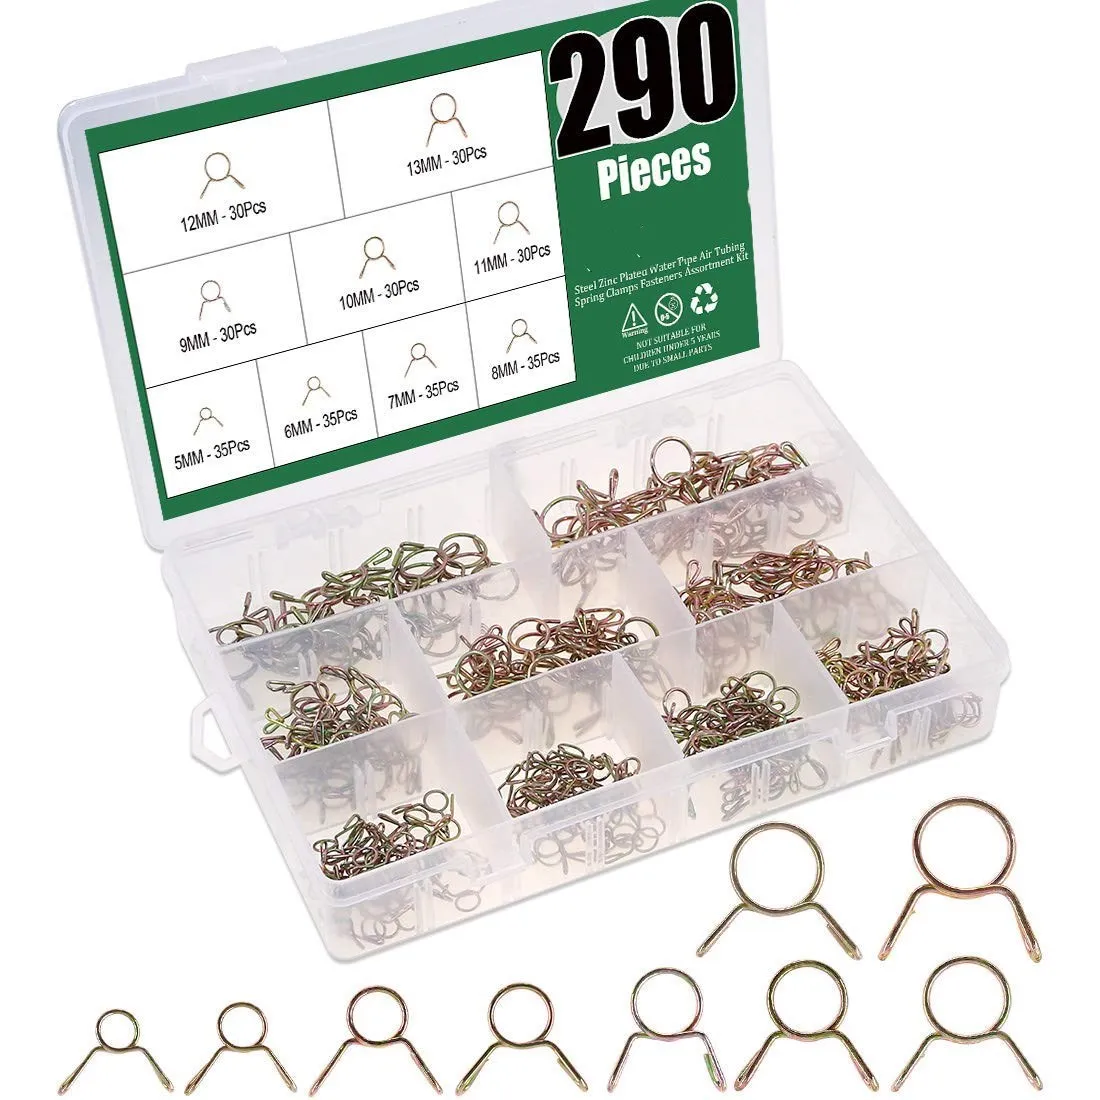 

5/6/7/8/9/10/11/12/13mm 290Pcs Steel Zinc Plated Fuel Hose Clamps Fasteners Assortment Kit for Motorcycle Scooter ATV